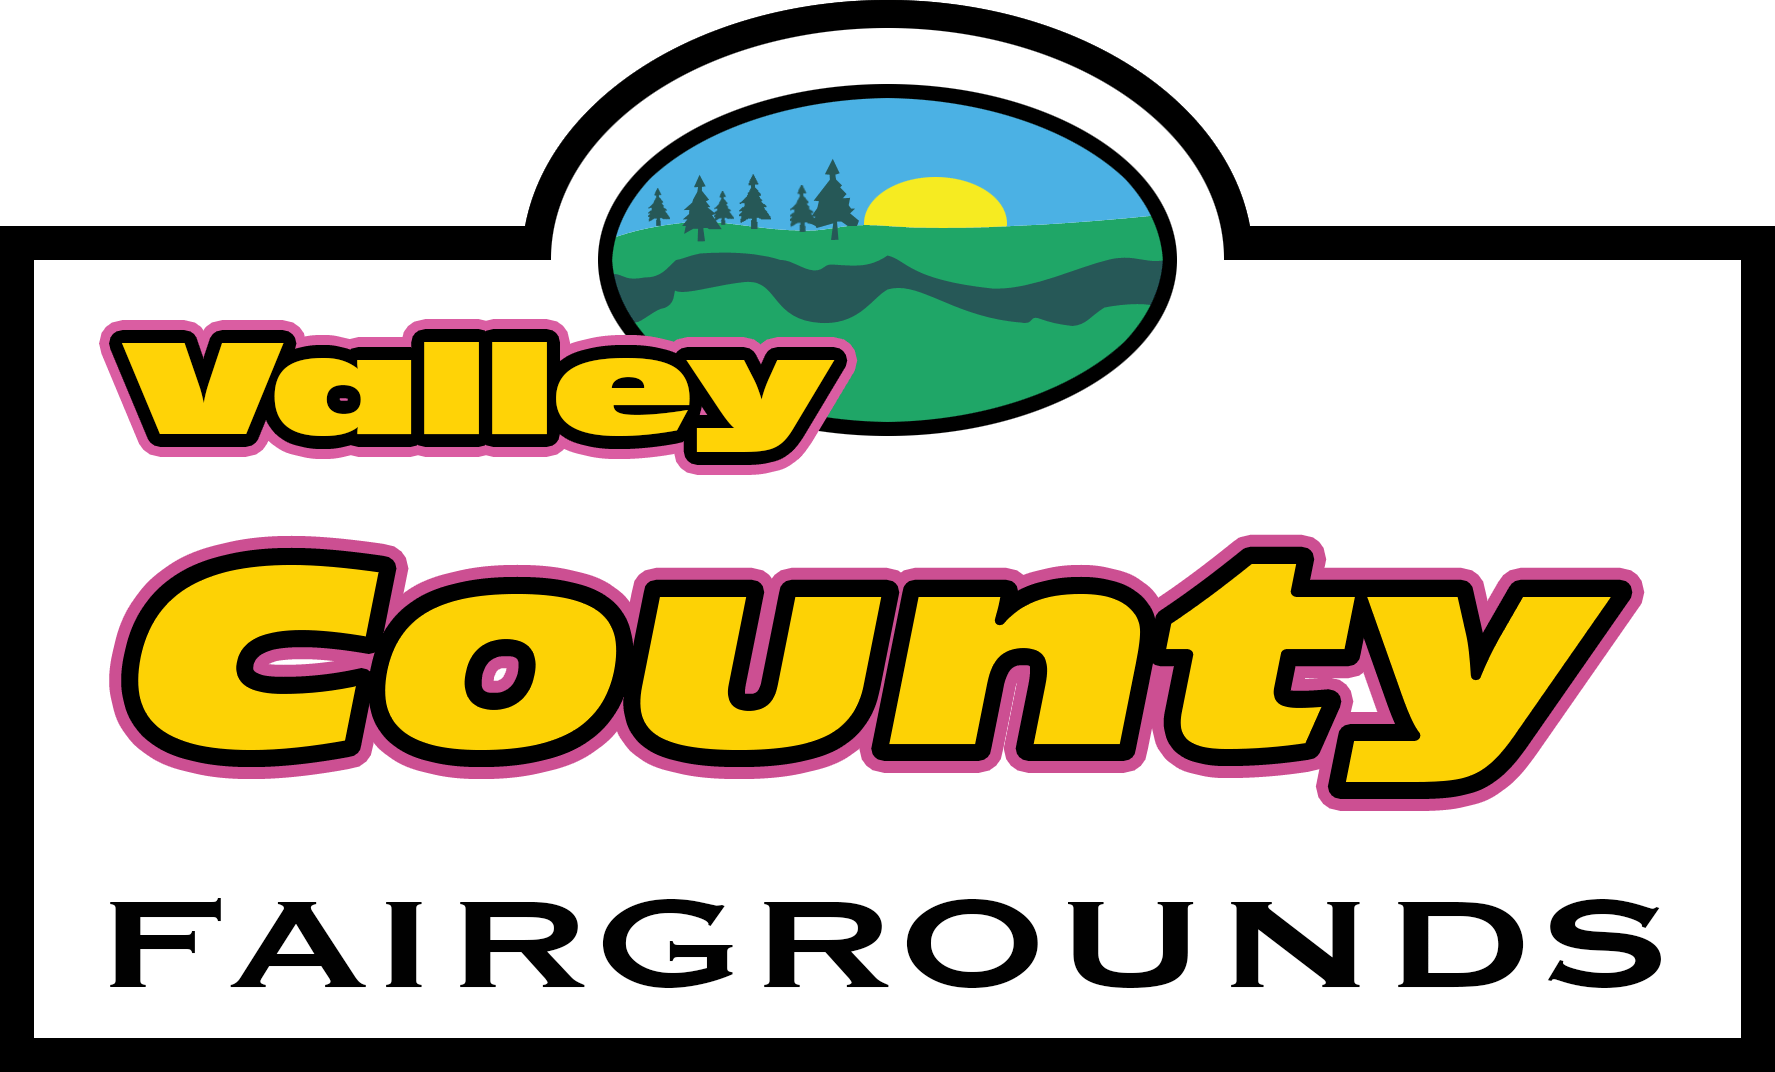 Valley County Fairgrounds